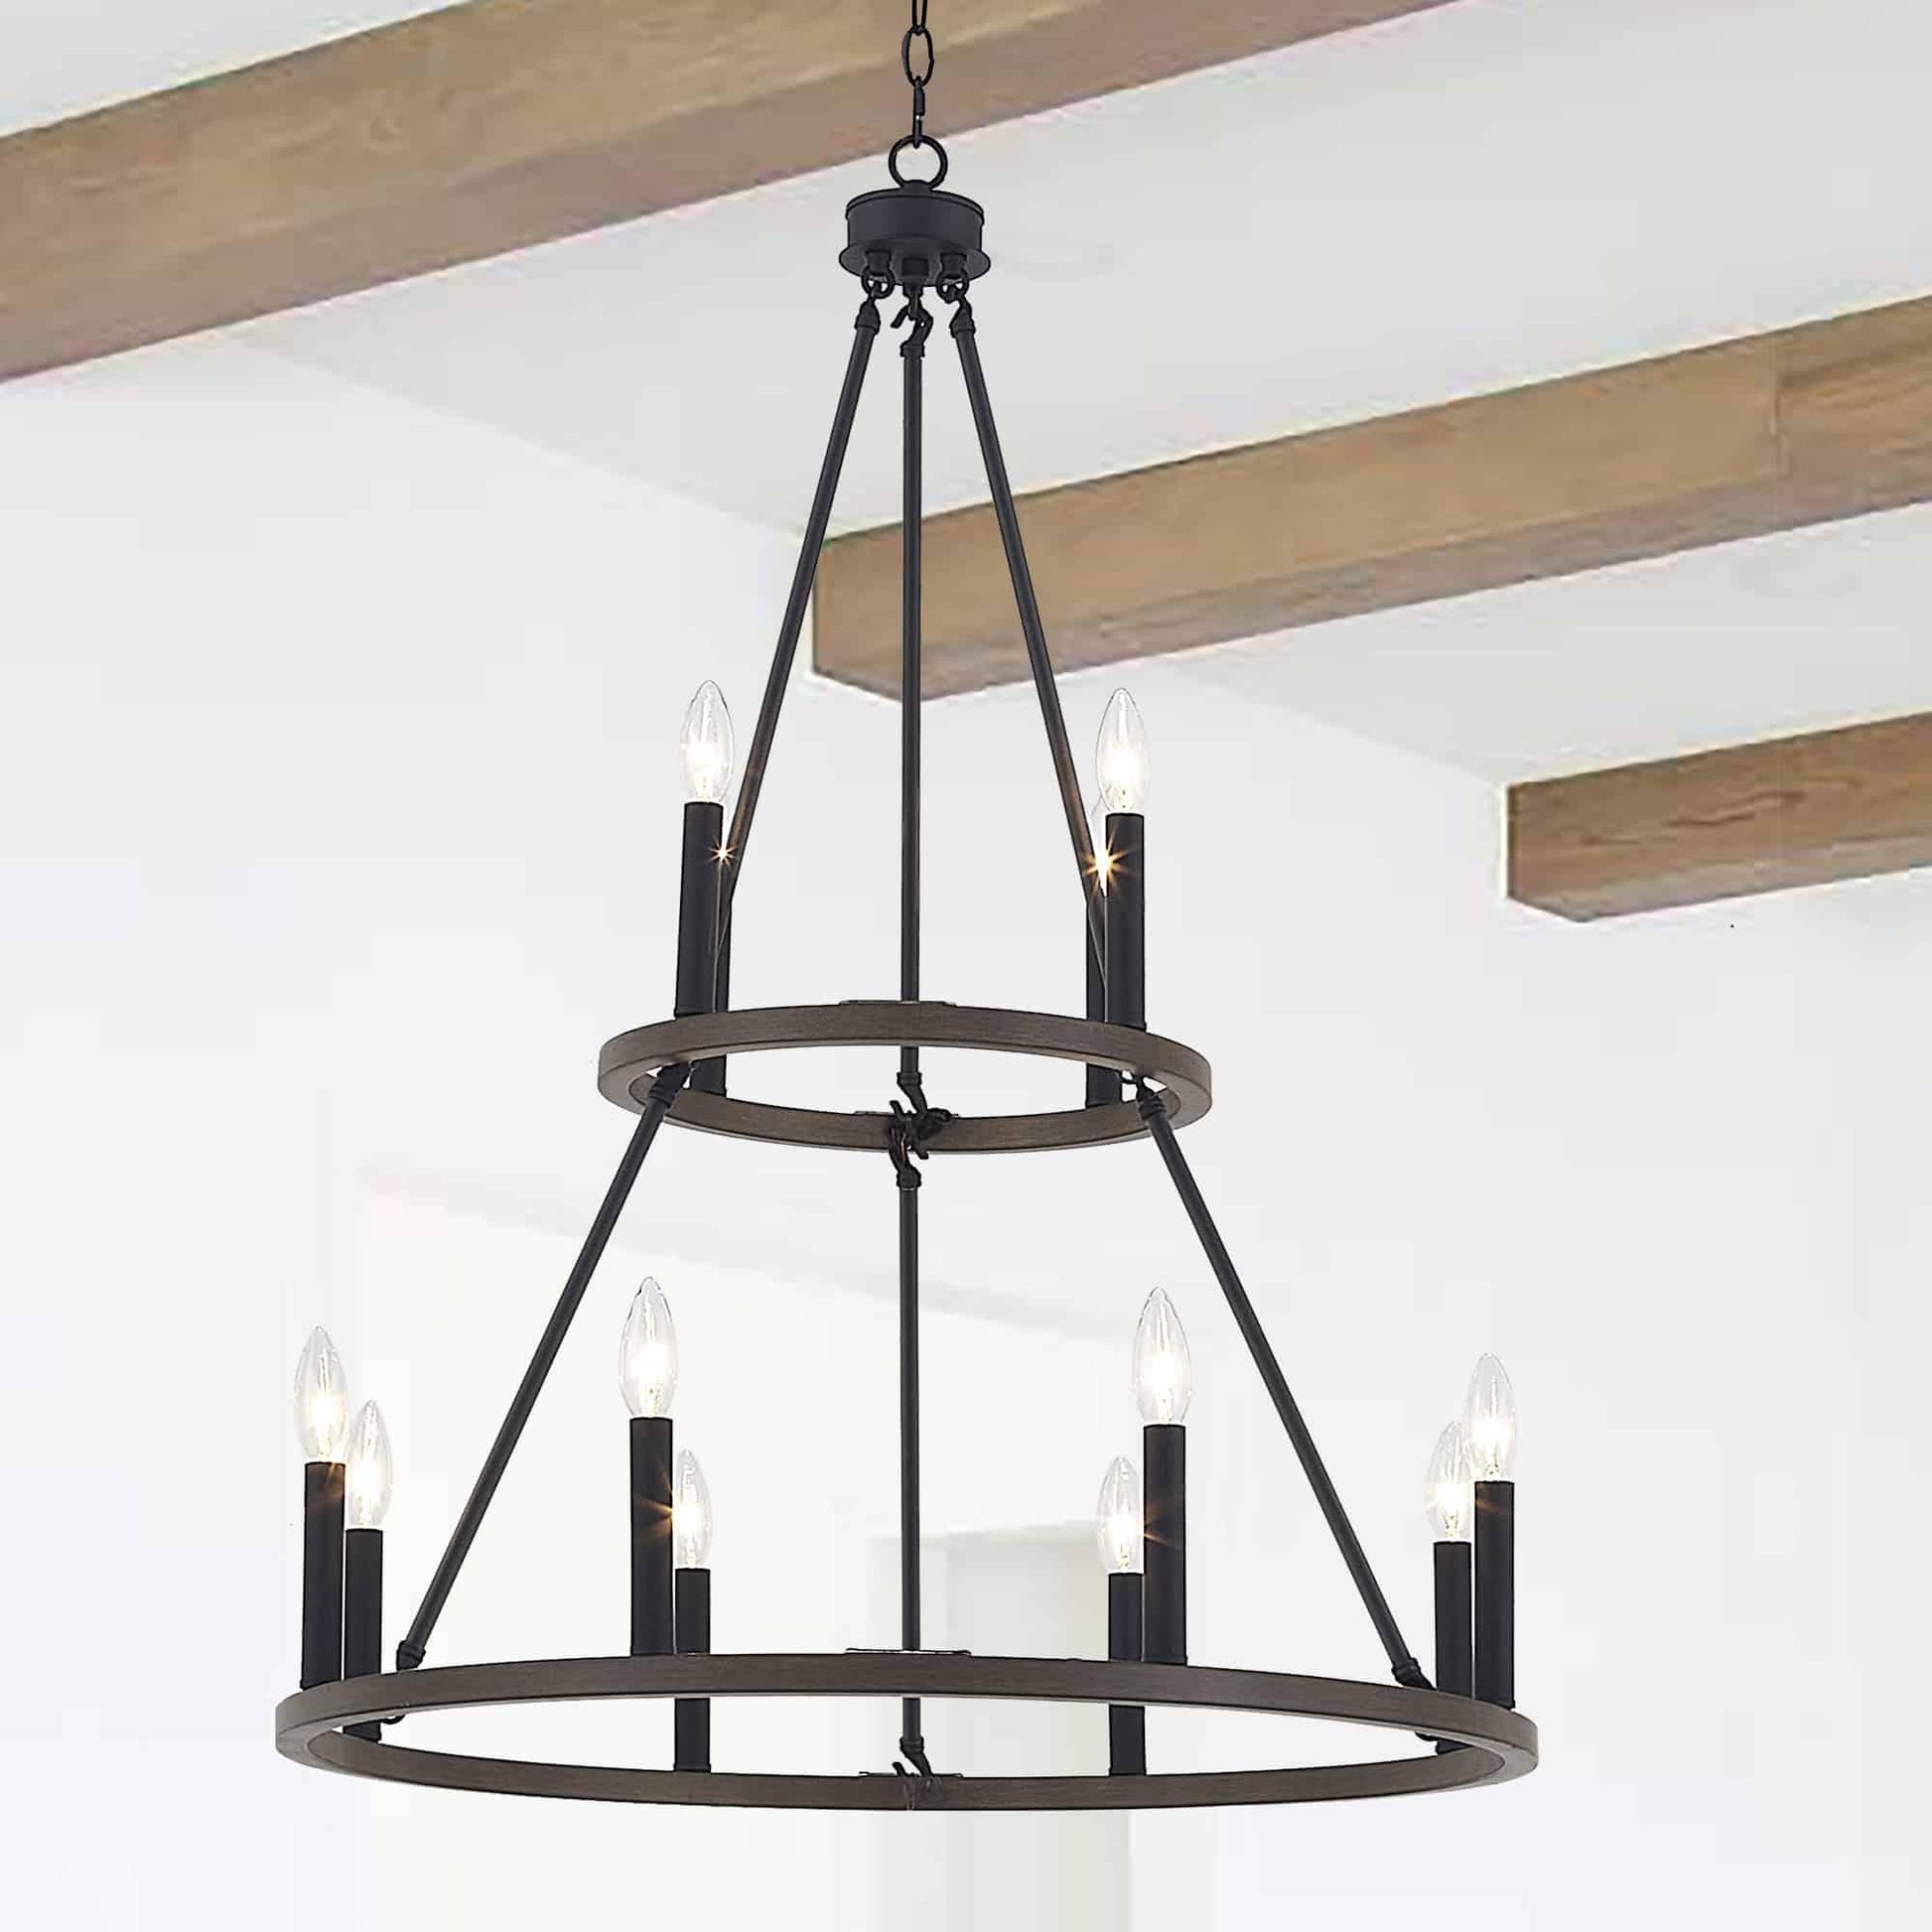 12 light candle style wagon wheel tiered chandelier (3) by ACROMA